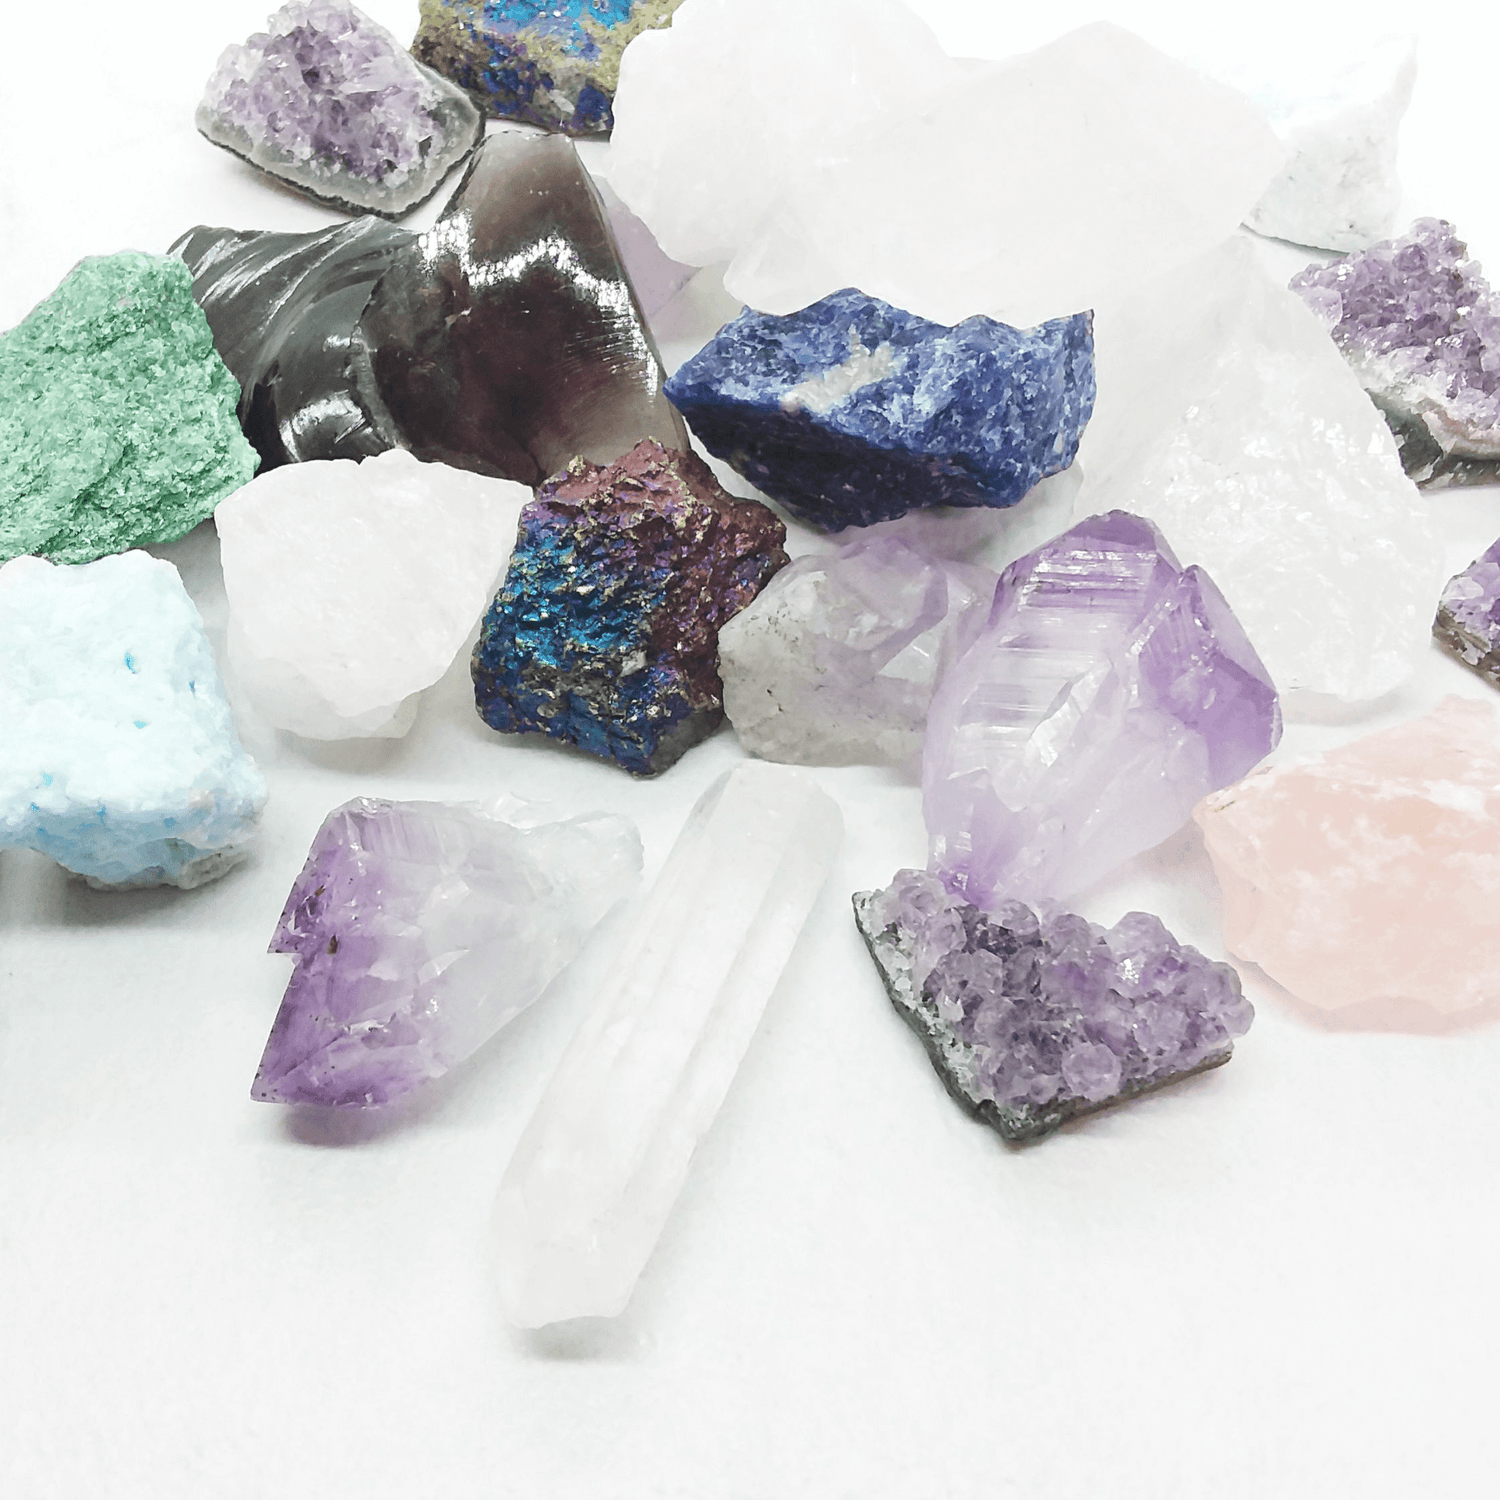 A Brief History on Crystals & Minerals